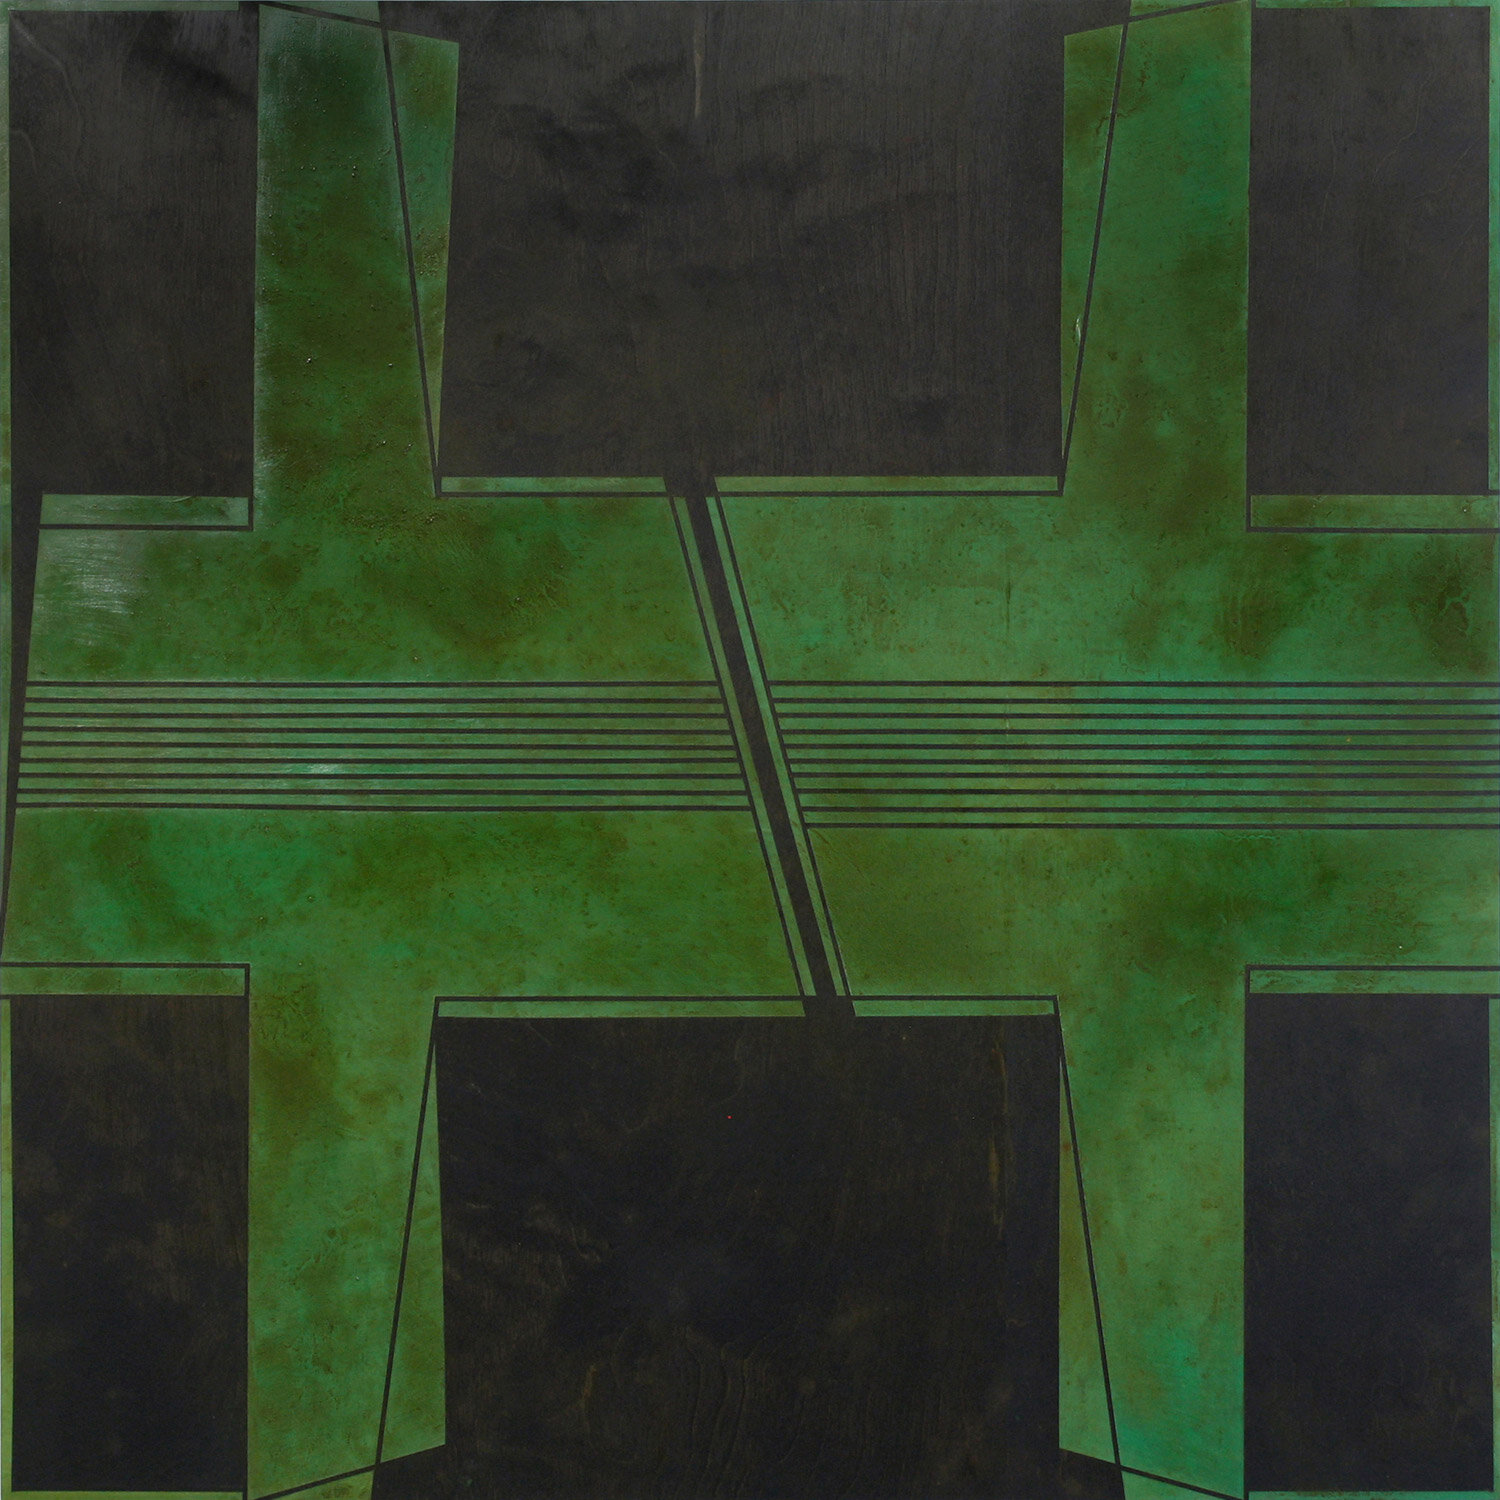    ‡‡    Sumi ink and oil paint on wood panel  36” x 36”   